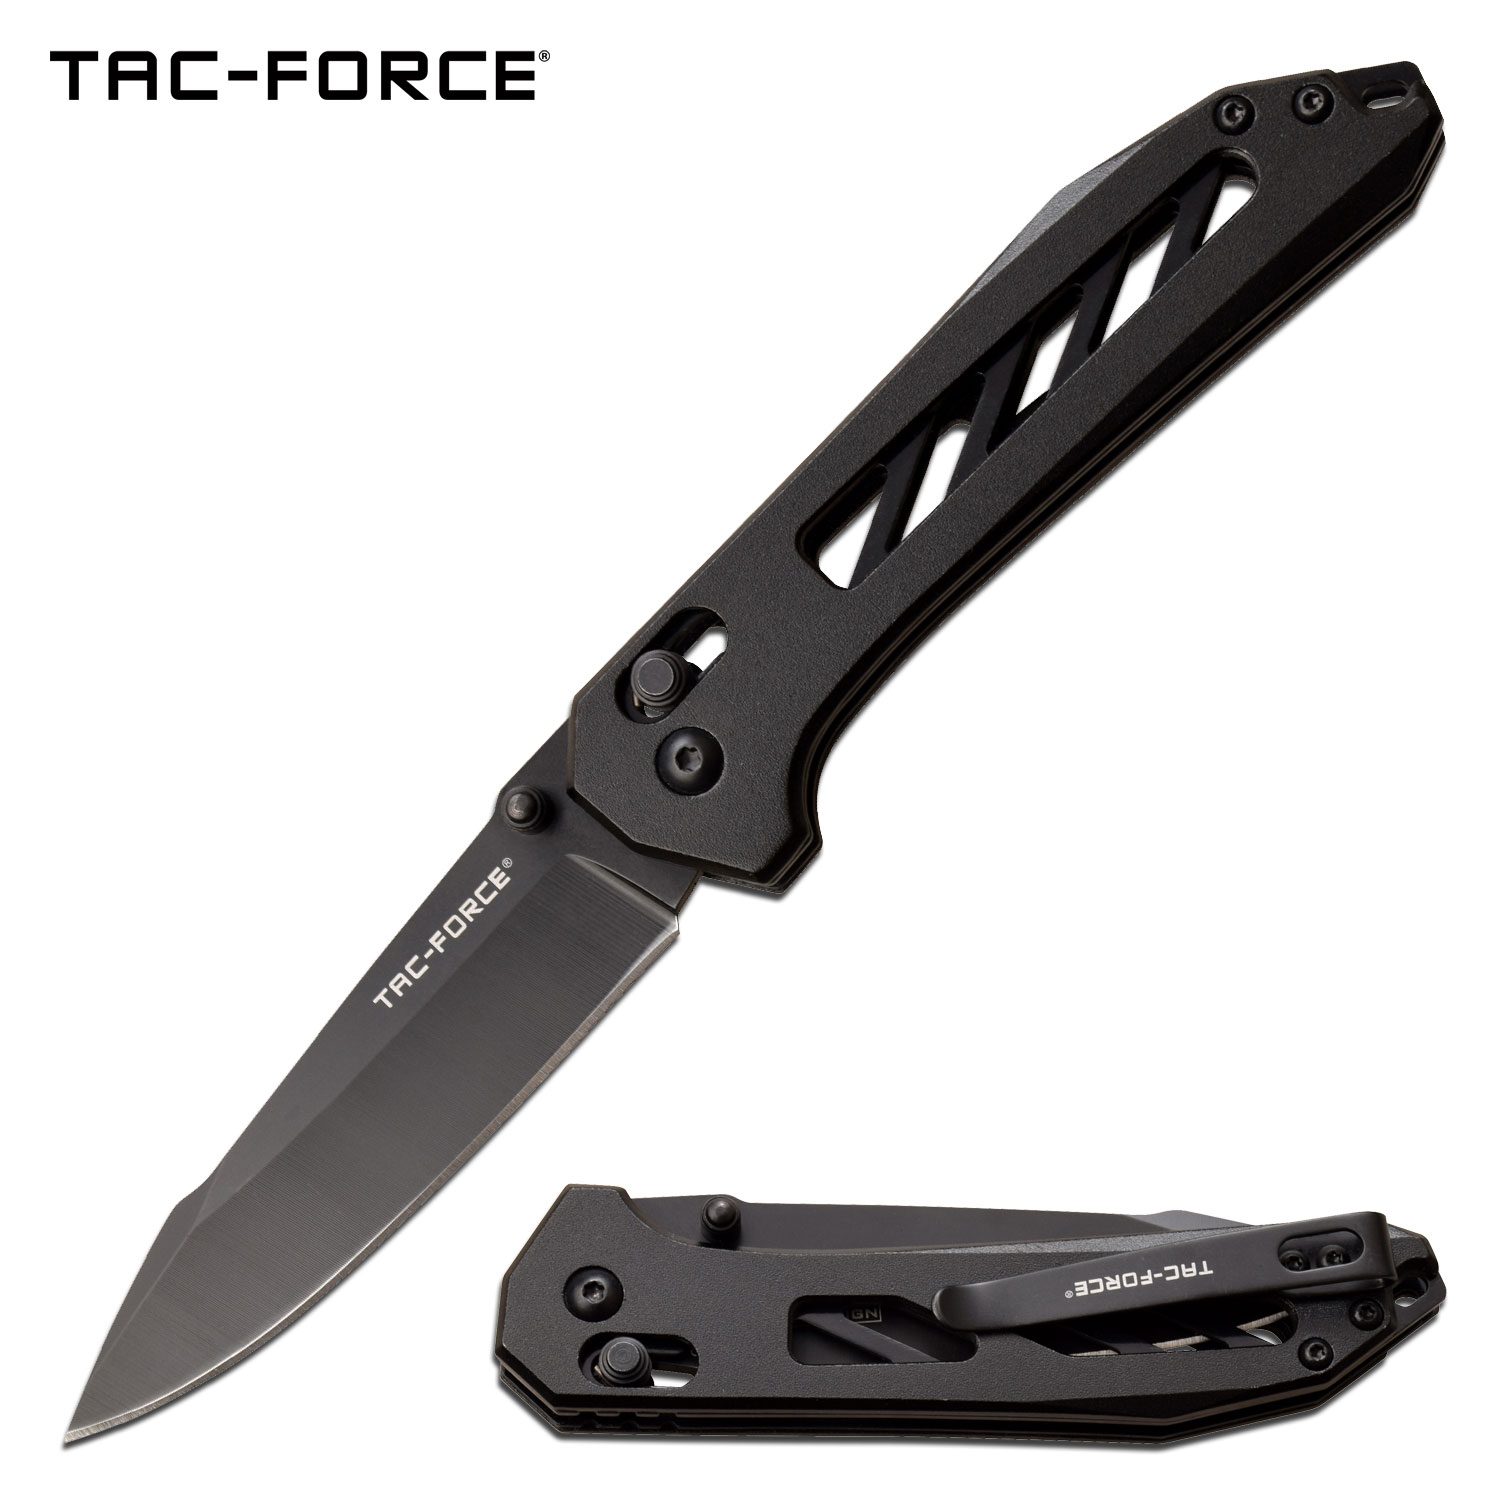 Folding Knife 8in Overall Tac-Force Black Stealth Rapid-Lock Tactical EDC 1035Bk